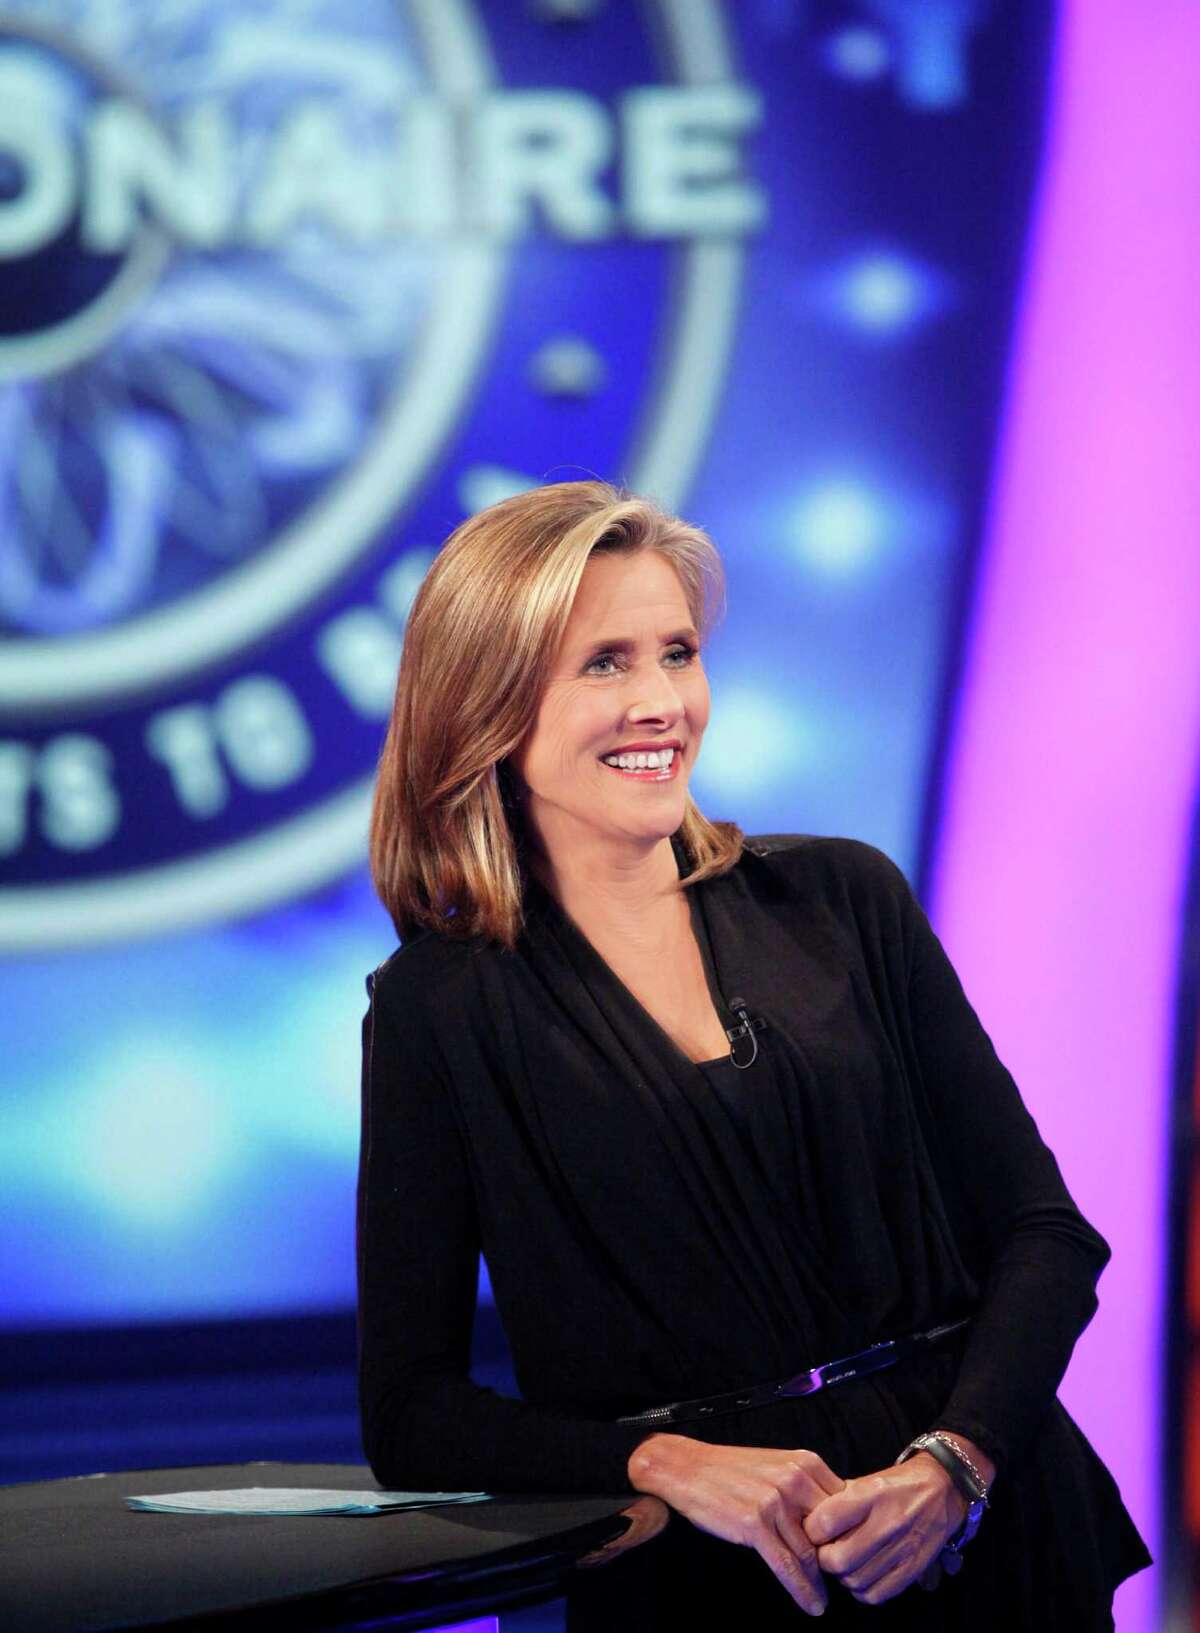 Meredith Vieira hosts "Who Wants to Be a Millionaire?"